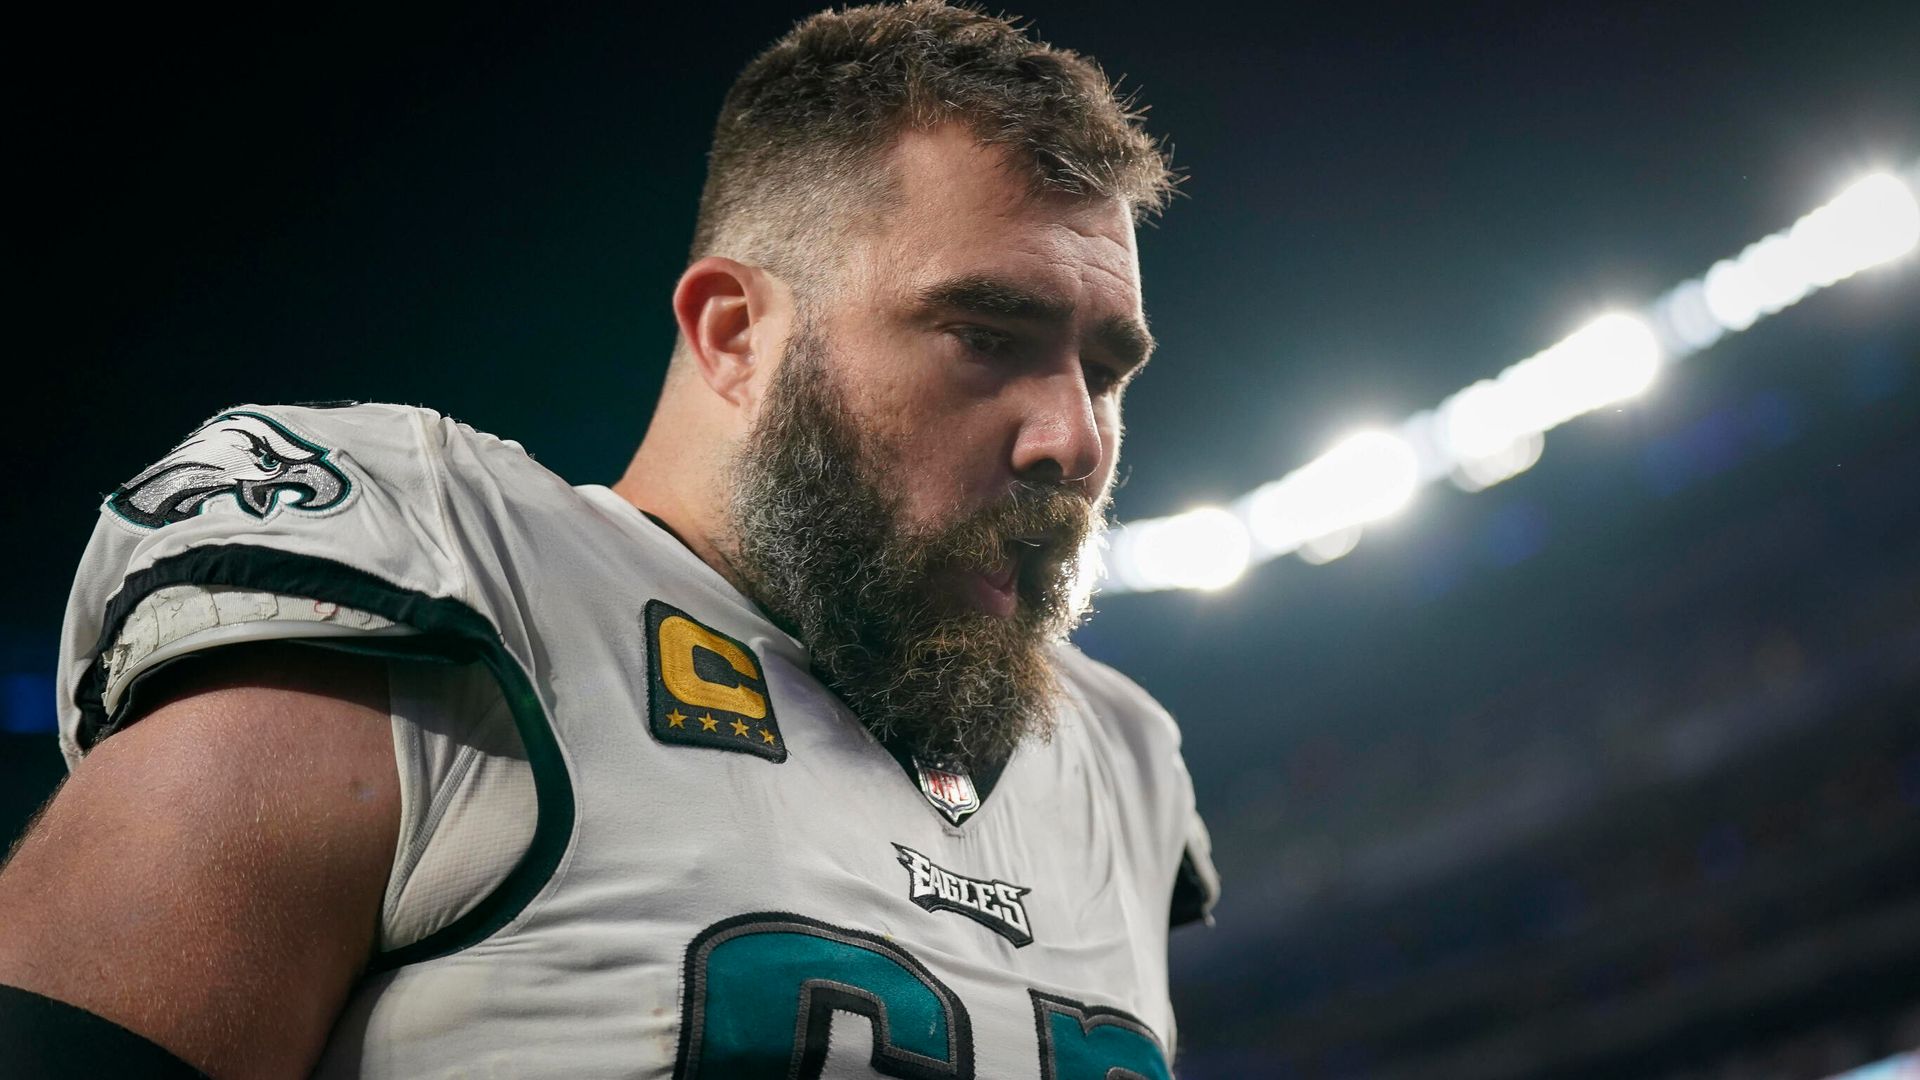 Eagles star Kelce set to retire after 13 seasons in the NFL